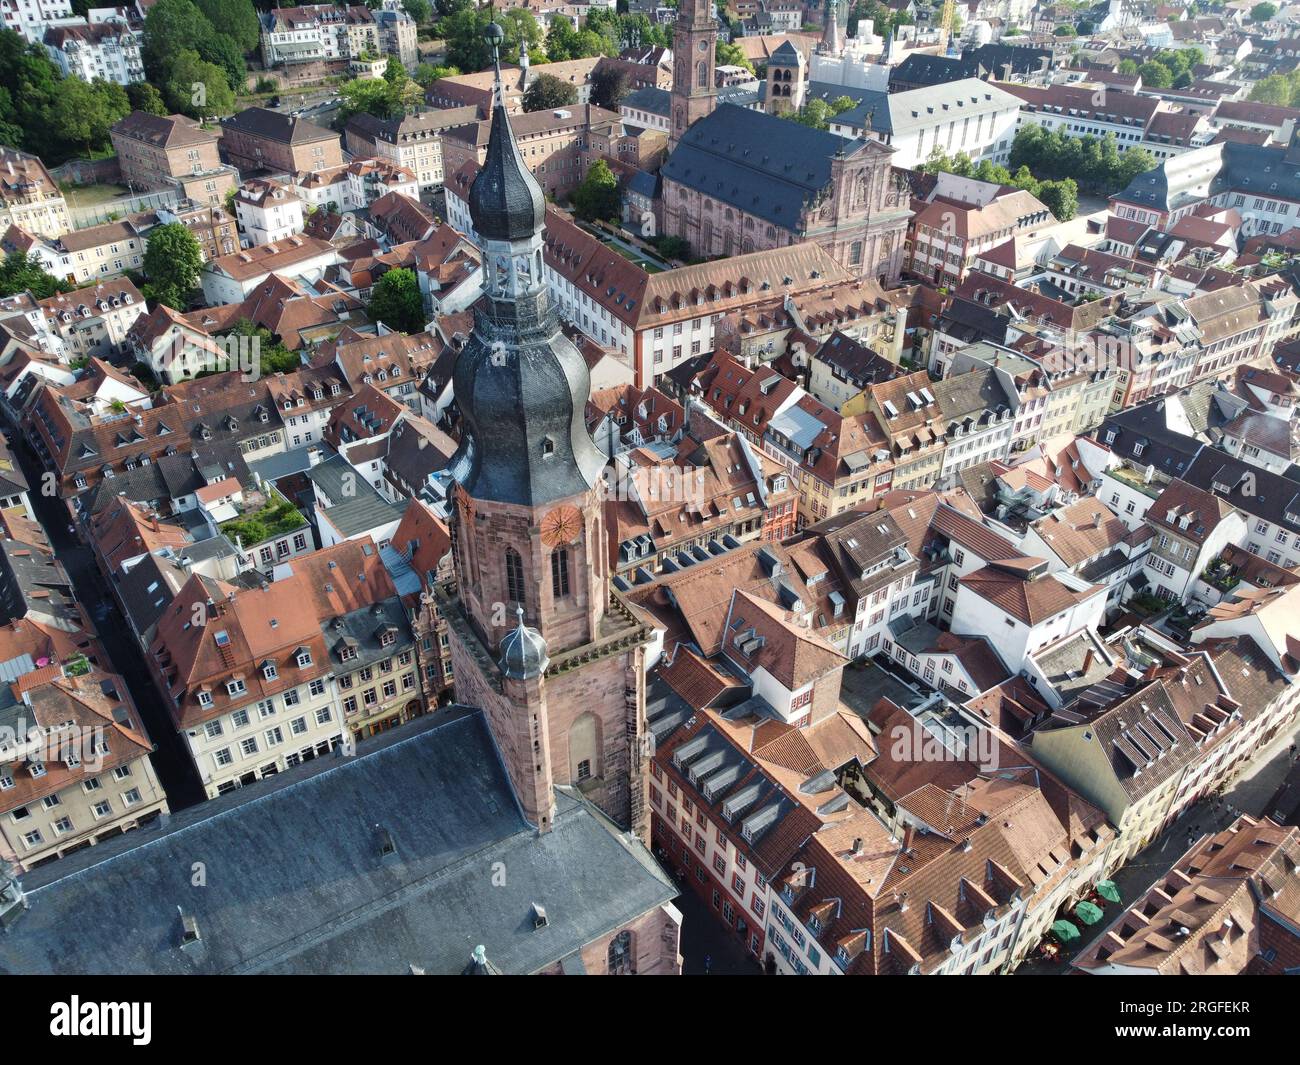 Aerial view of Heiliggeistkirche church and Heidelberg University campus in the old town, Heidelberg, Baden-Württemberg, Germany Stock Photo